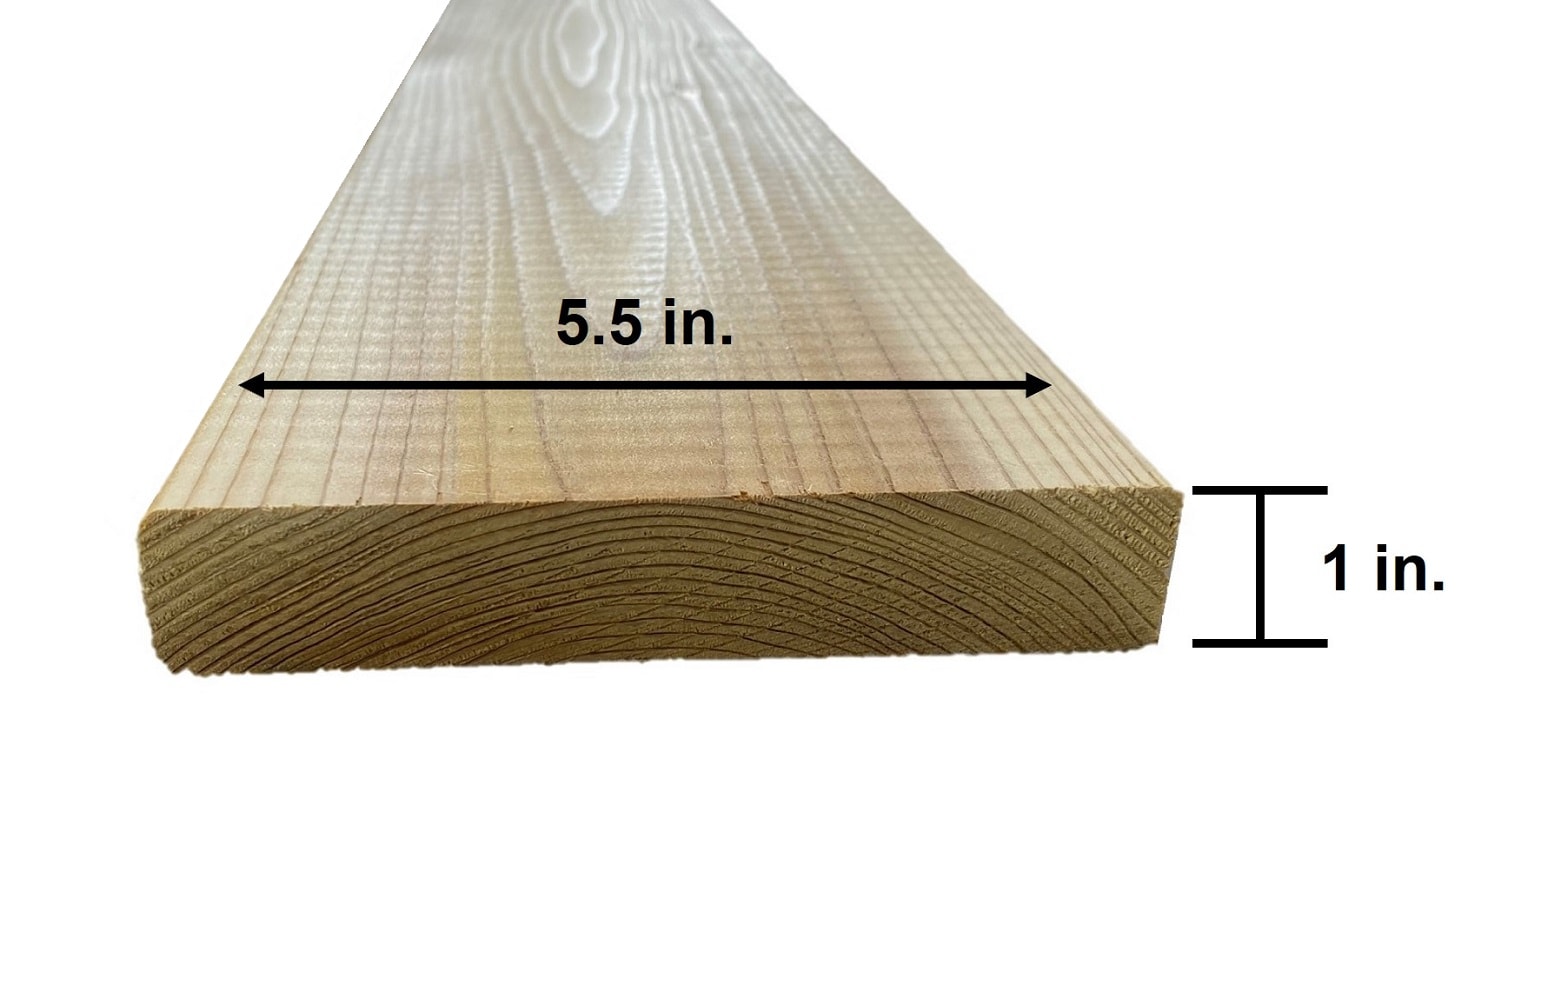 4/4 1” Bass Wood Boards Kiln Dried / Dimensional Lumber / Cut To Size  Basswood